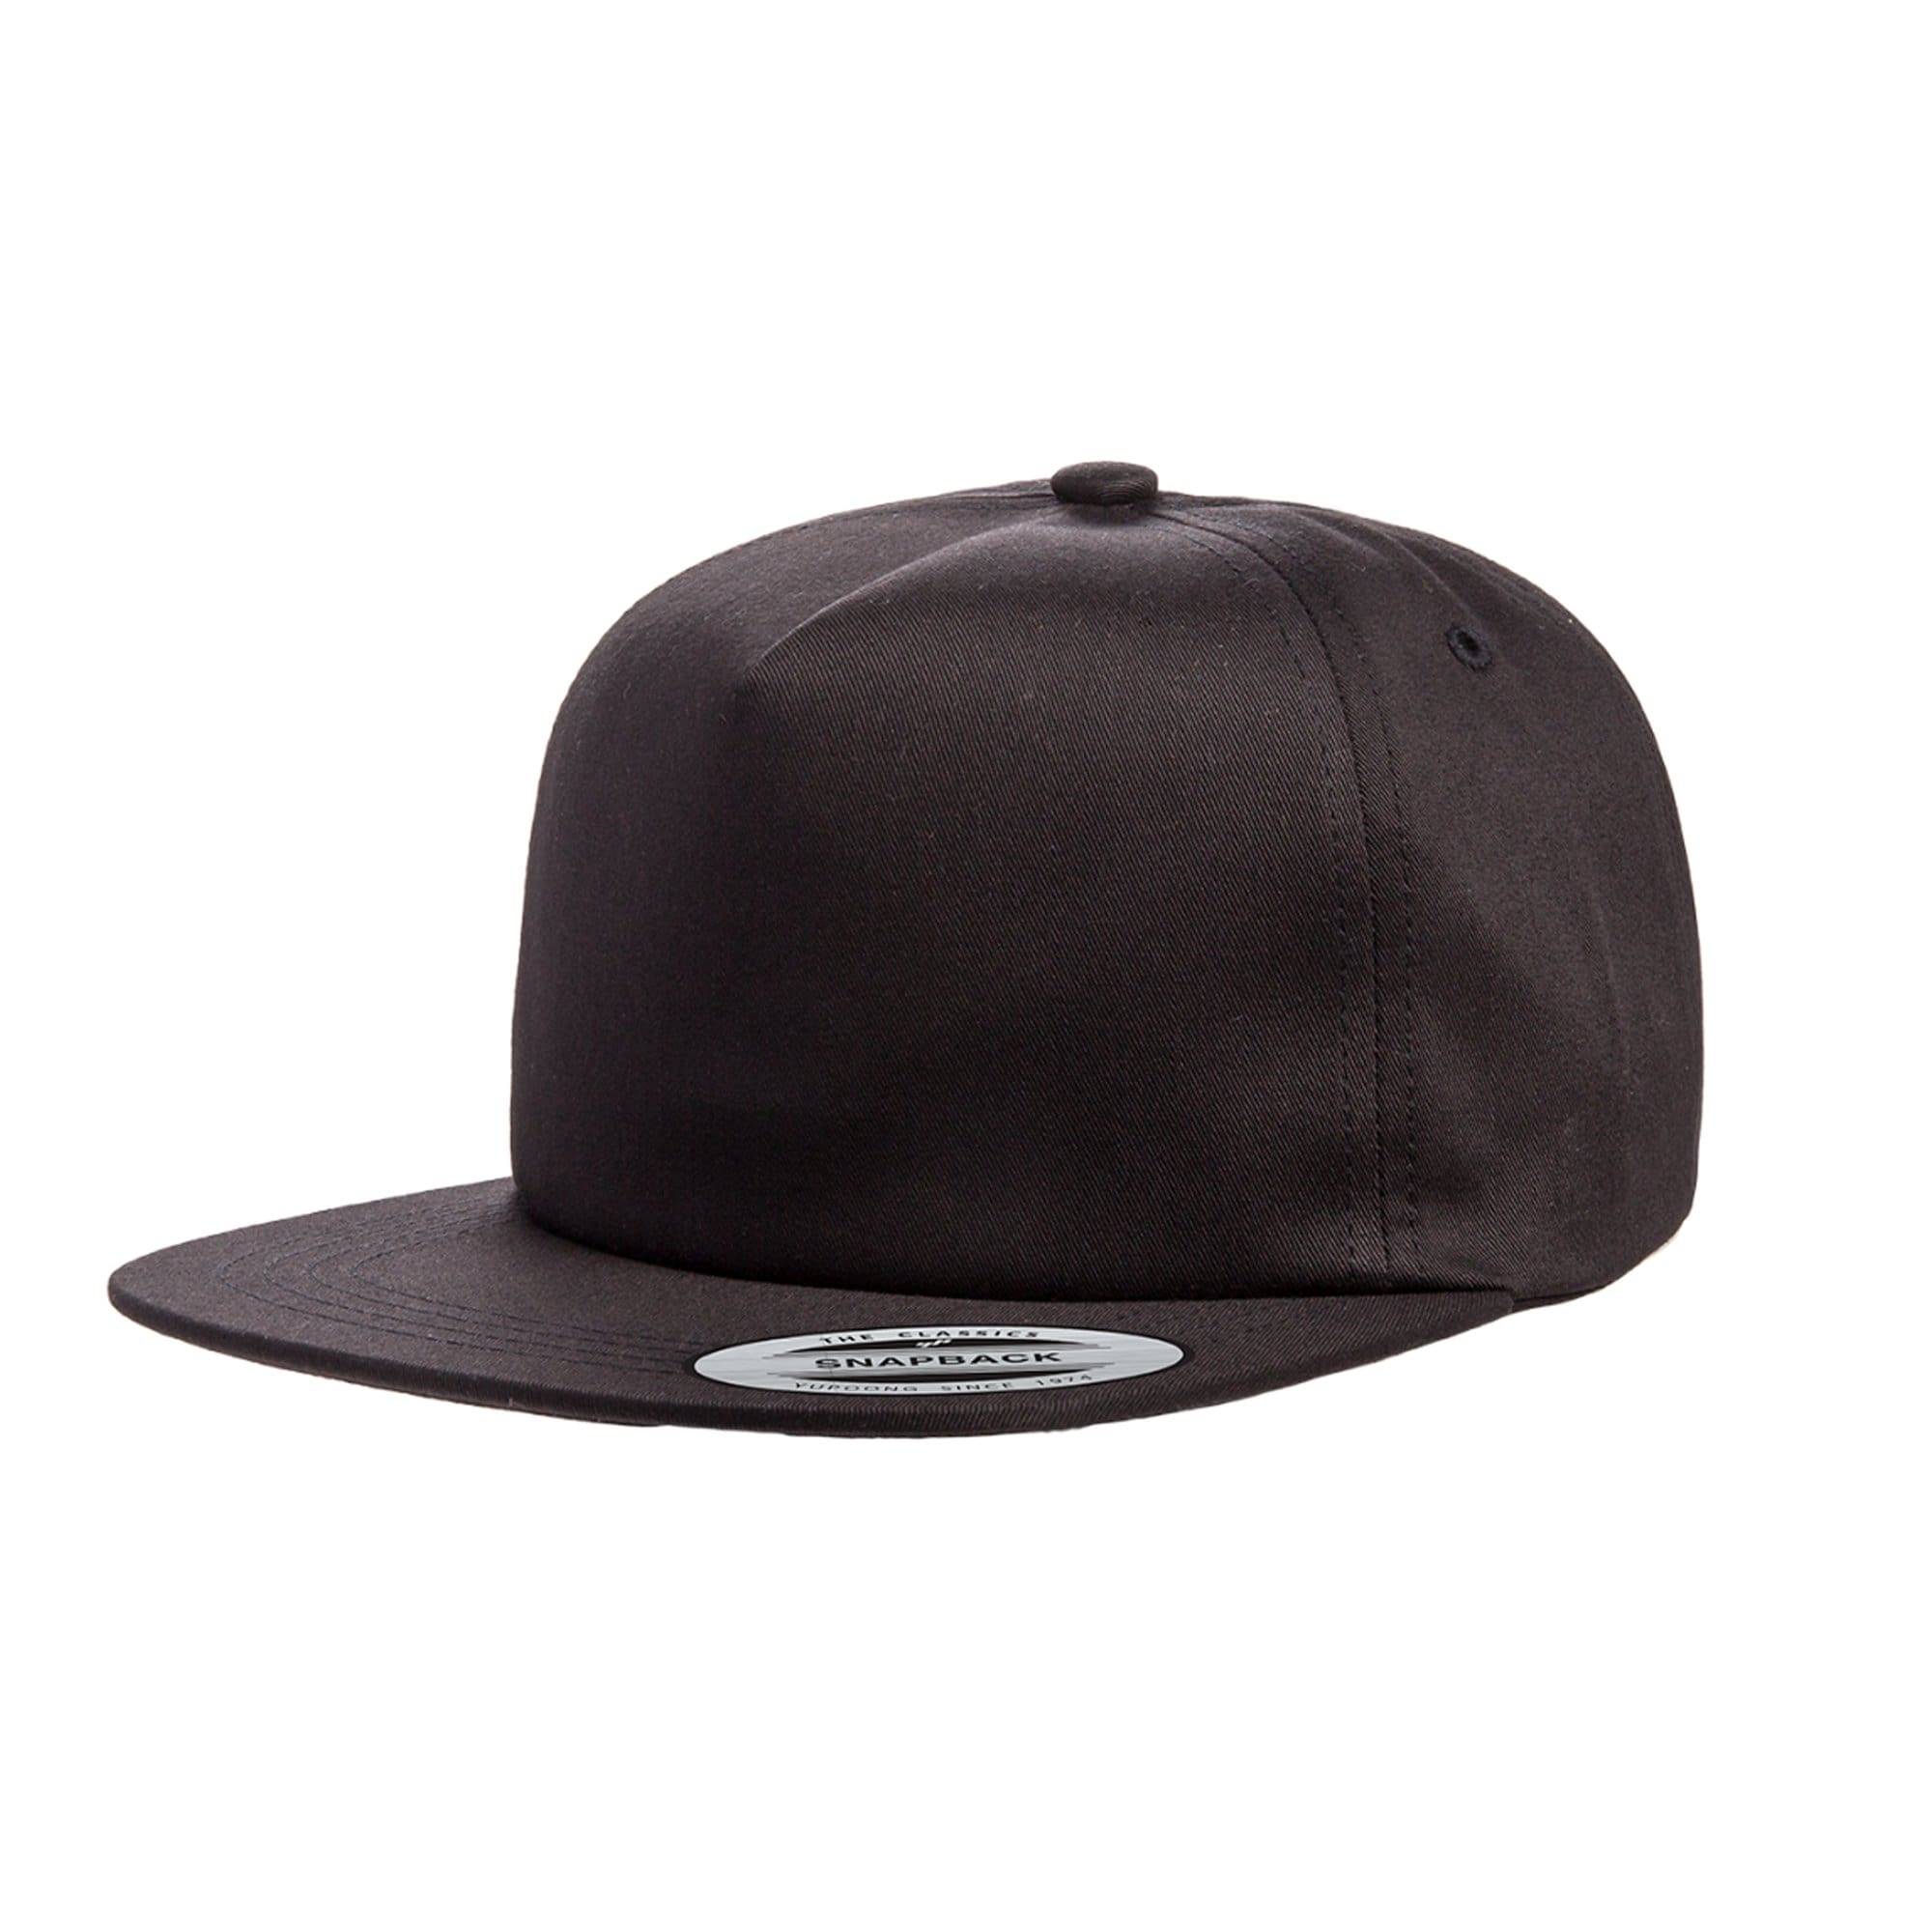 Unstructured snapback hat for embroidery or screen print at Black Fish ...